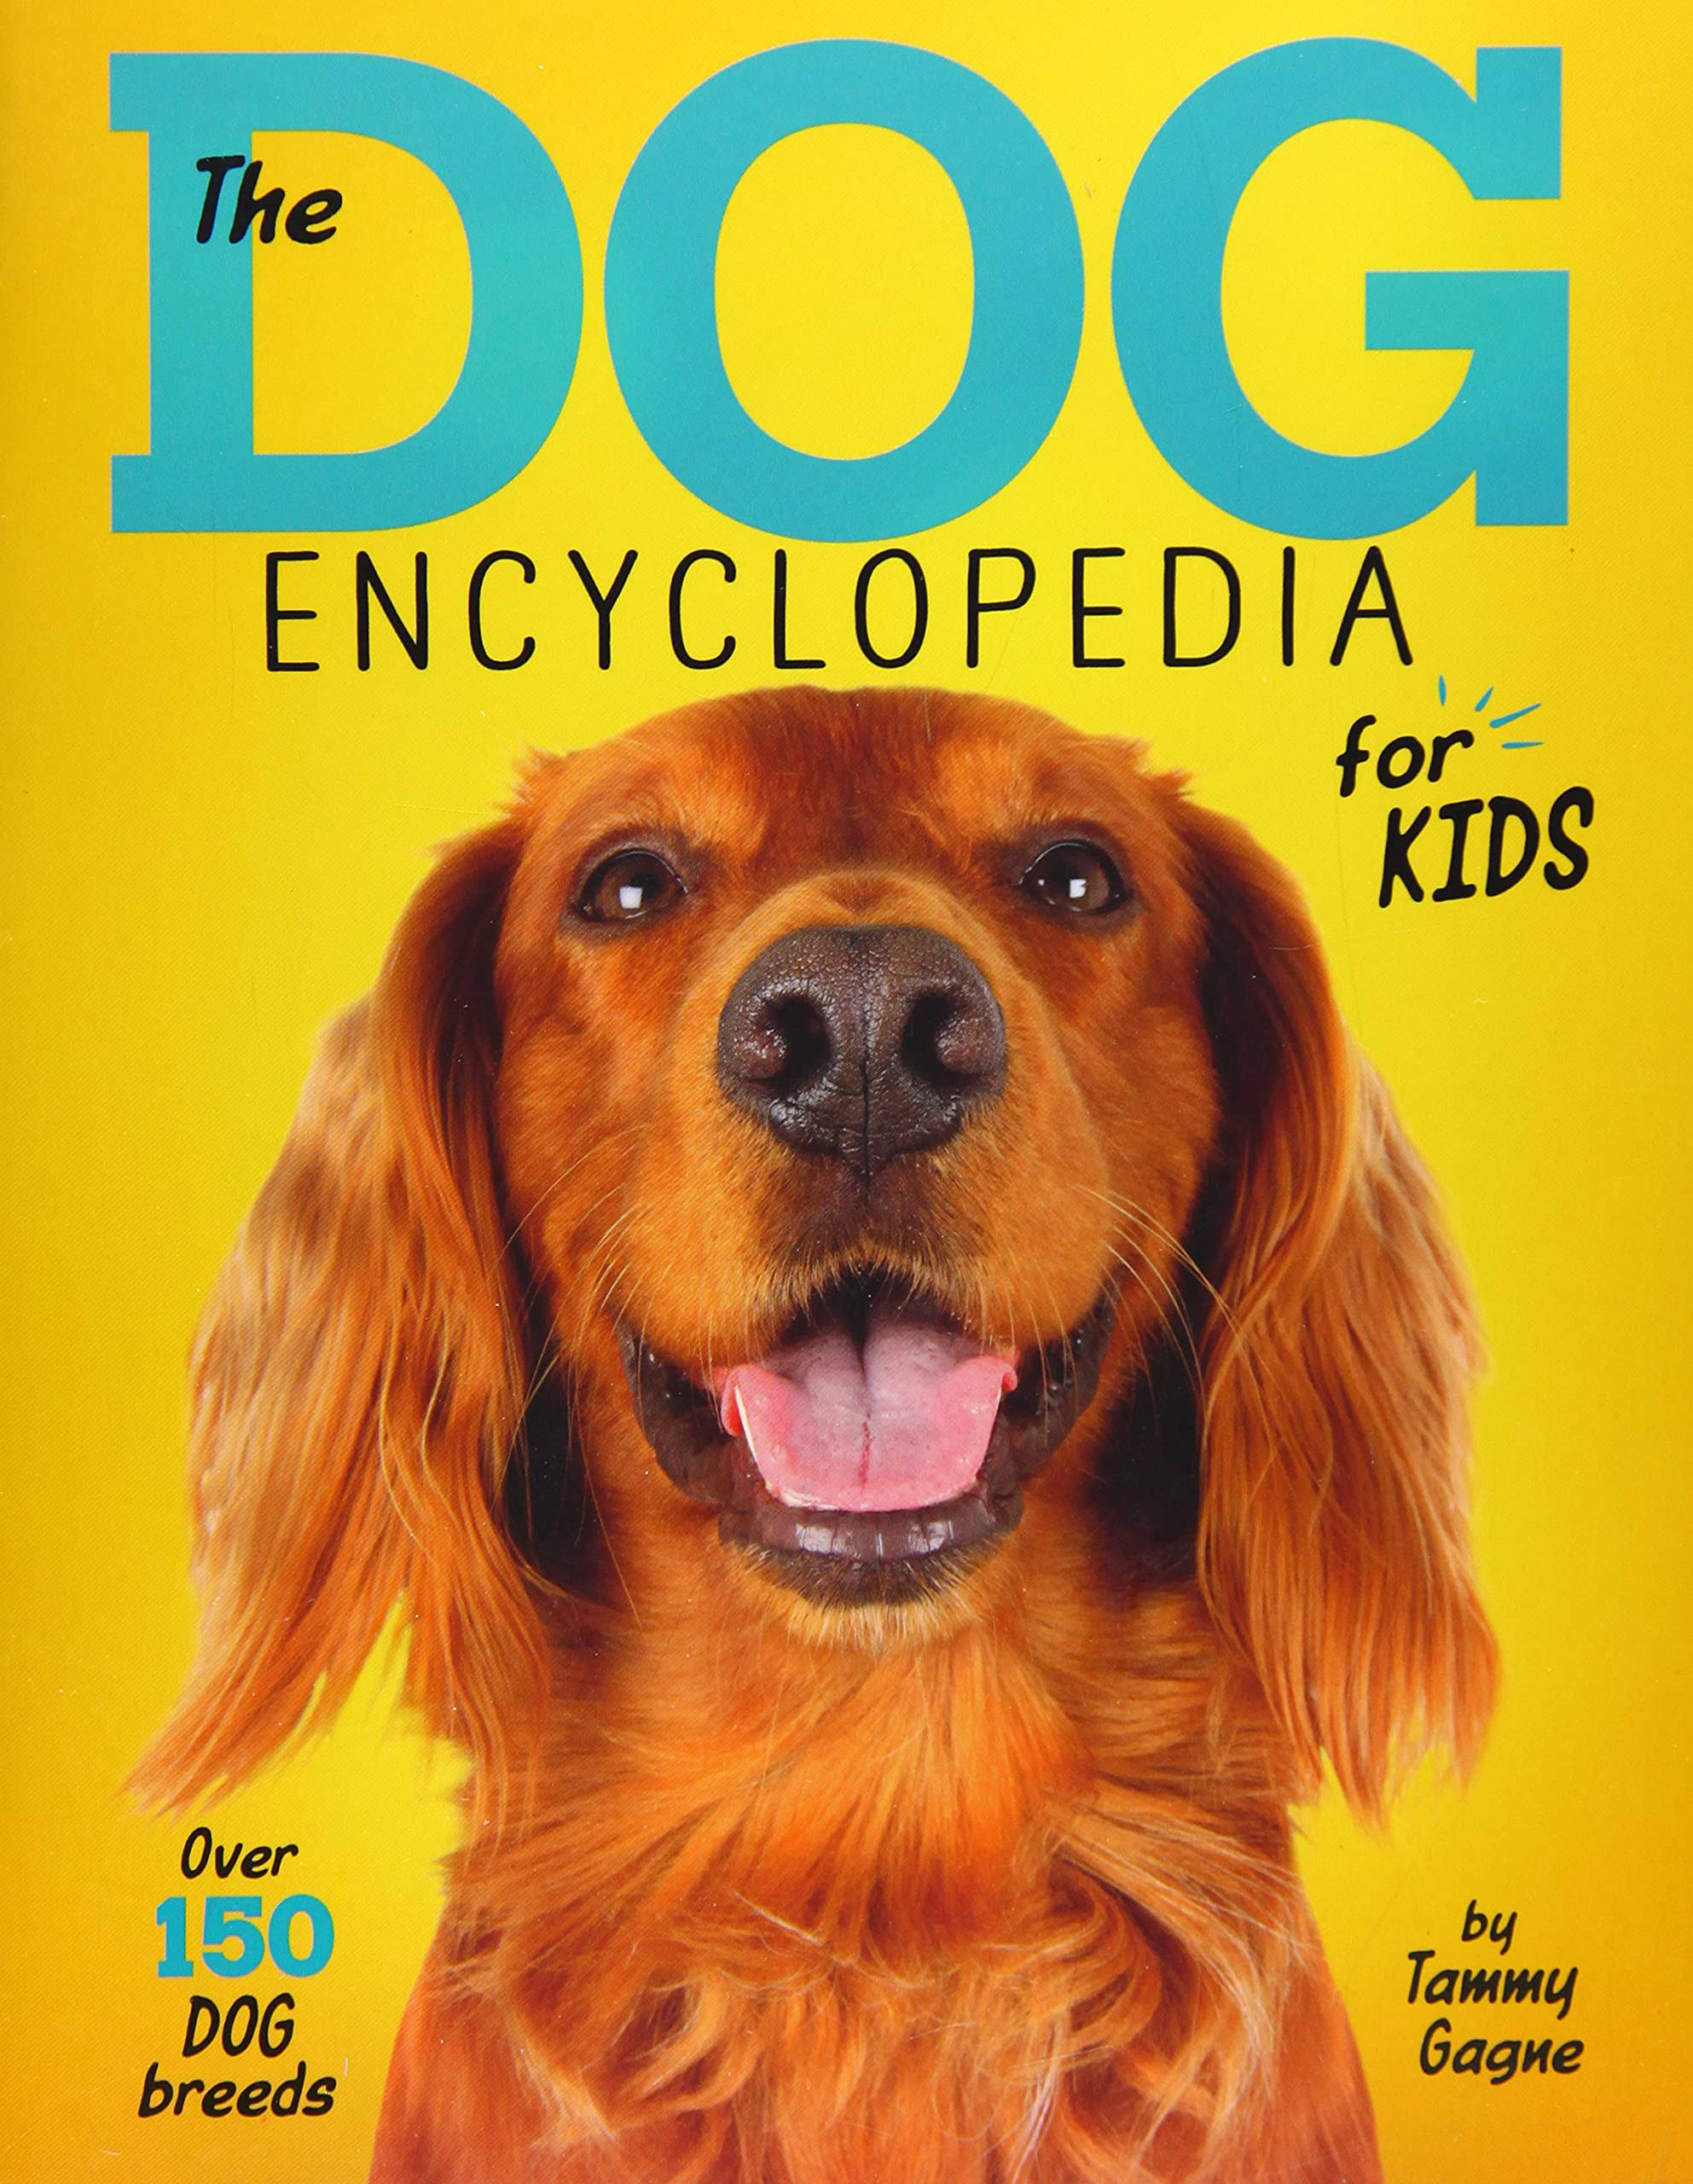 The Dog Encyclopedia for Kids [Book]